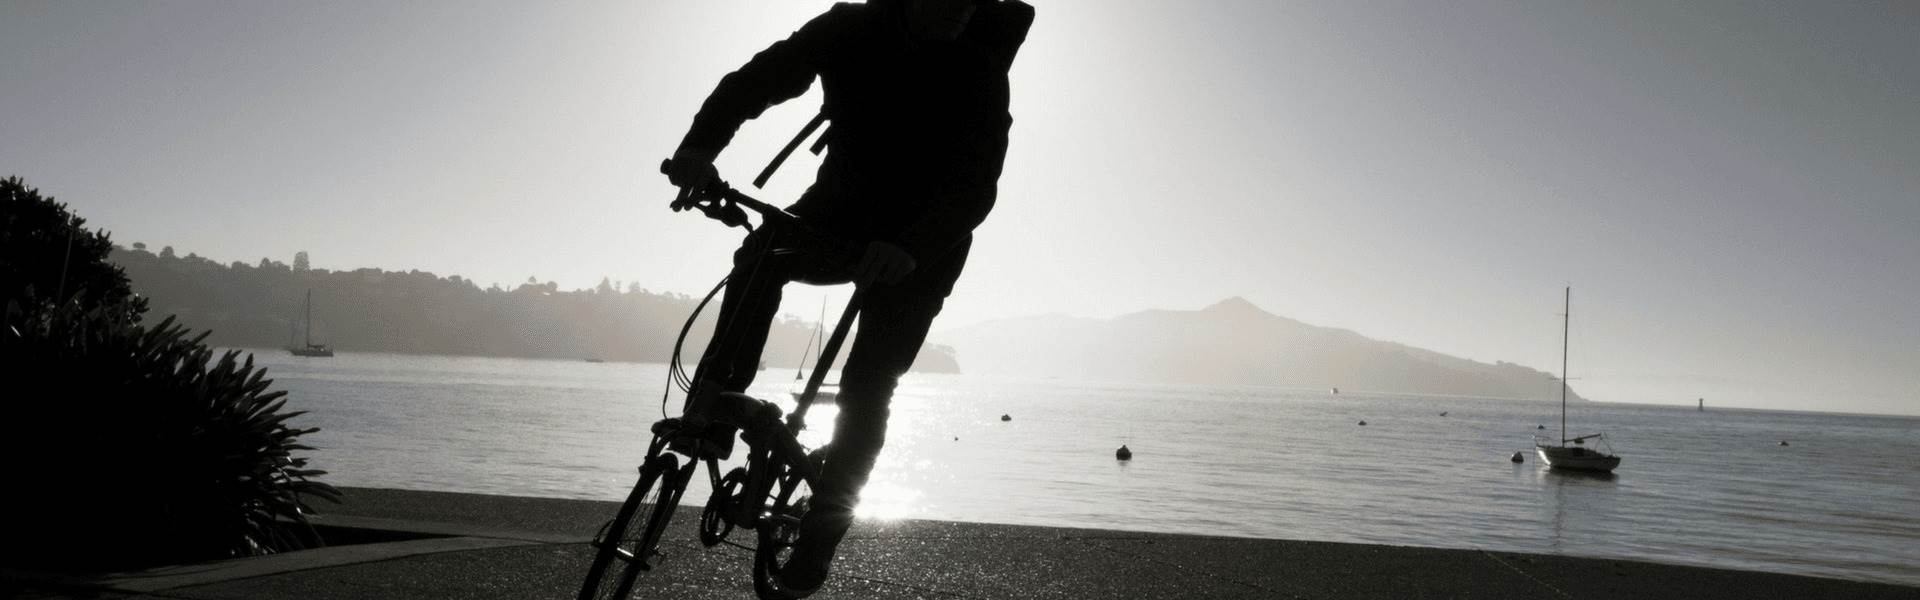 Person riding folding bike with water and sun behind them